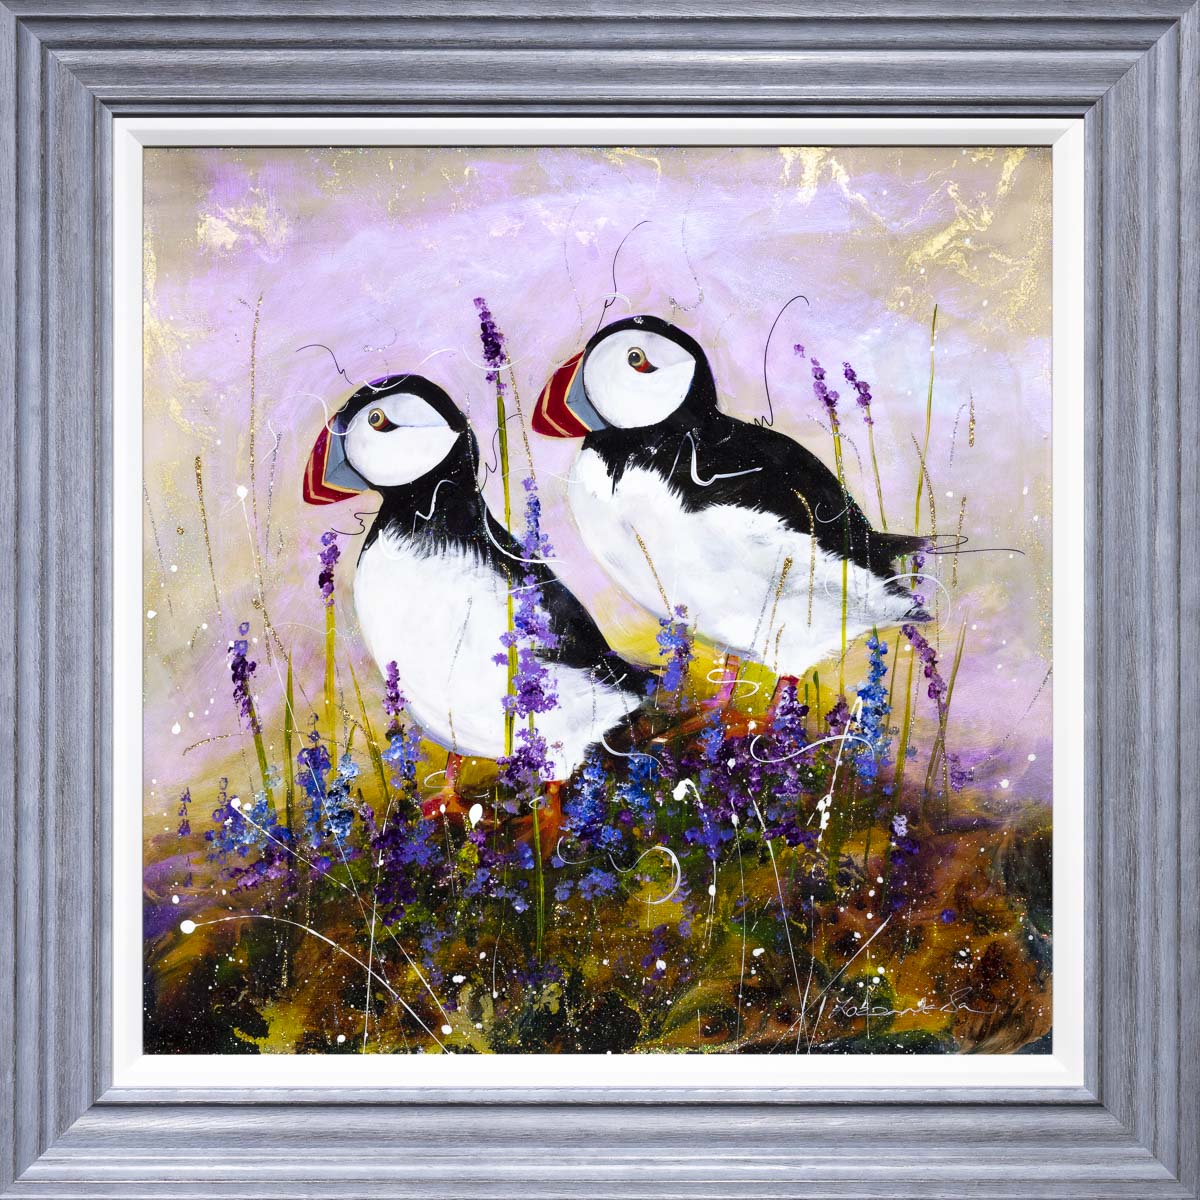 Huff and Puff - Original Rozanne Bell Framed